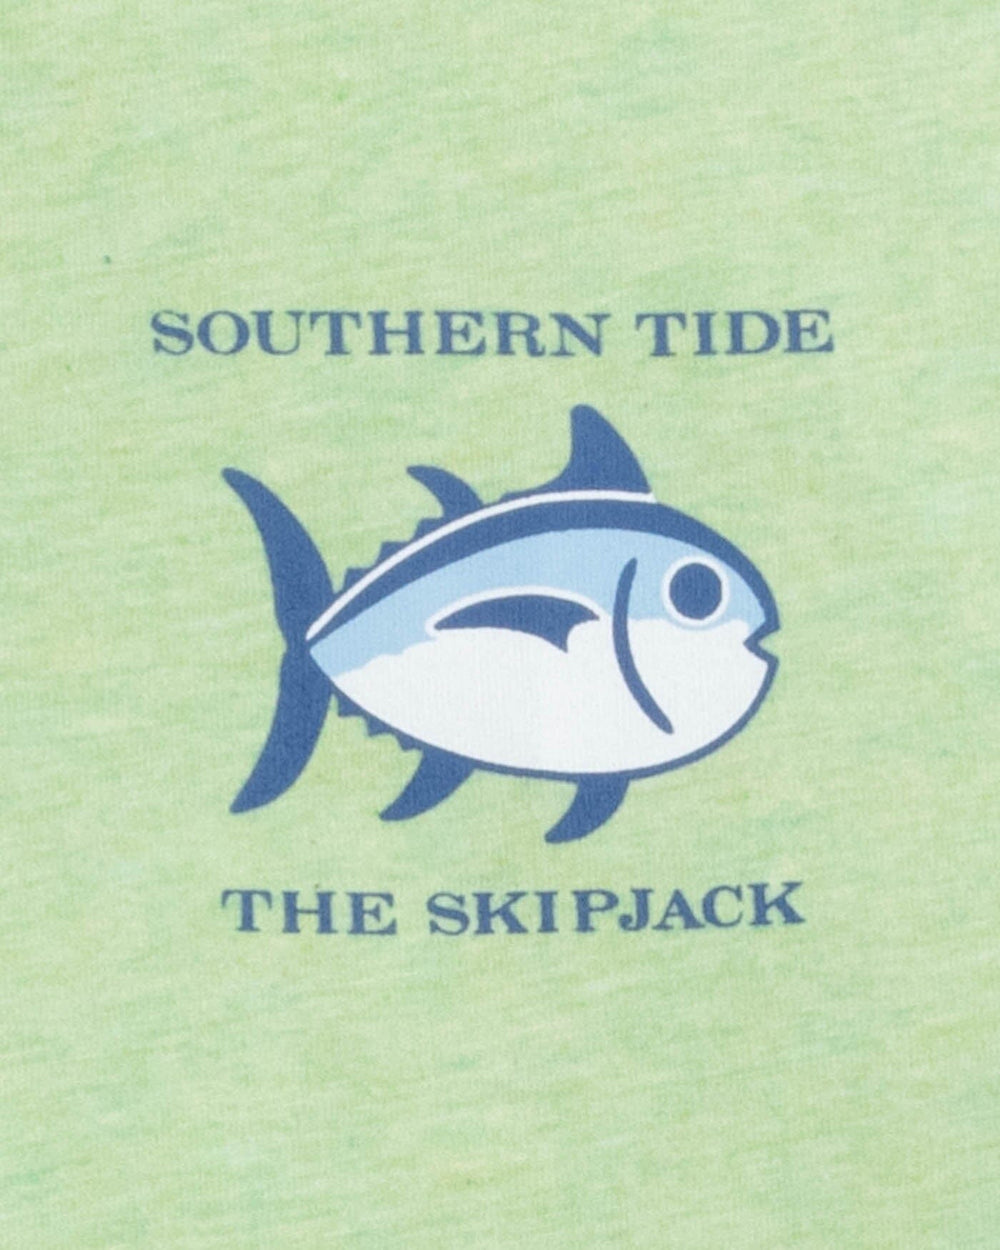 The detail view of the Southern Tide heathered-original-skipjack-t-shirt-2 by Southern Tide - Heather Smoke Green